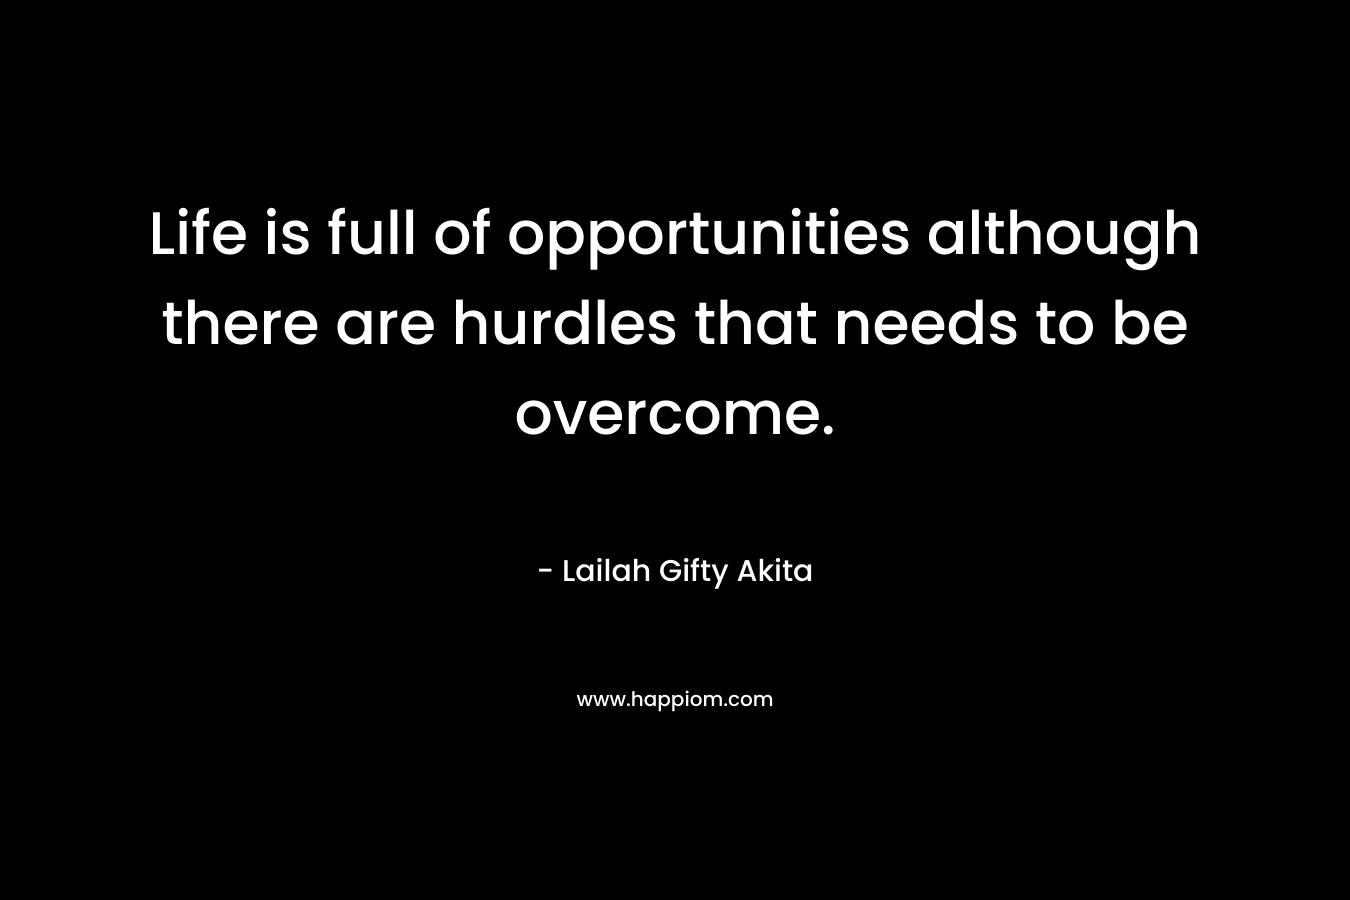 Life is full of opportunities although there are hurdles that needs to be overcome. – Lailah Gifty Akita